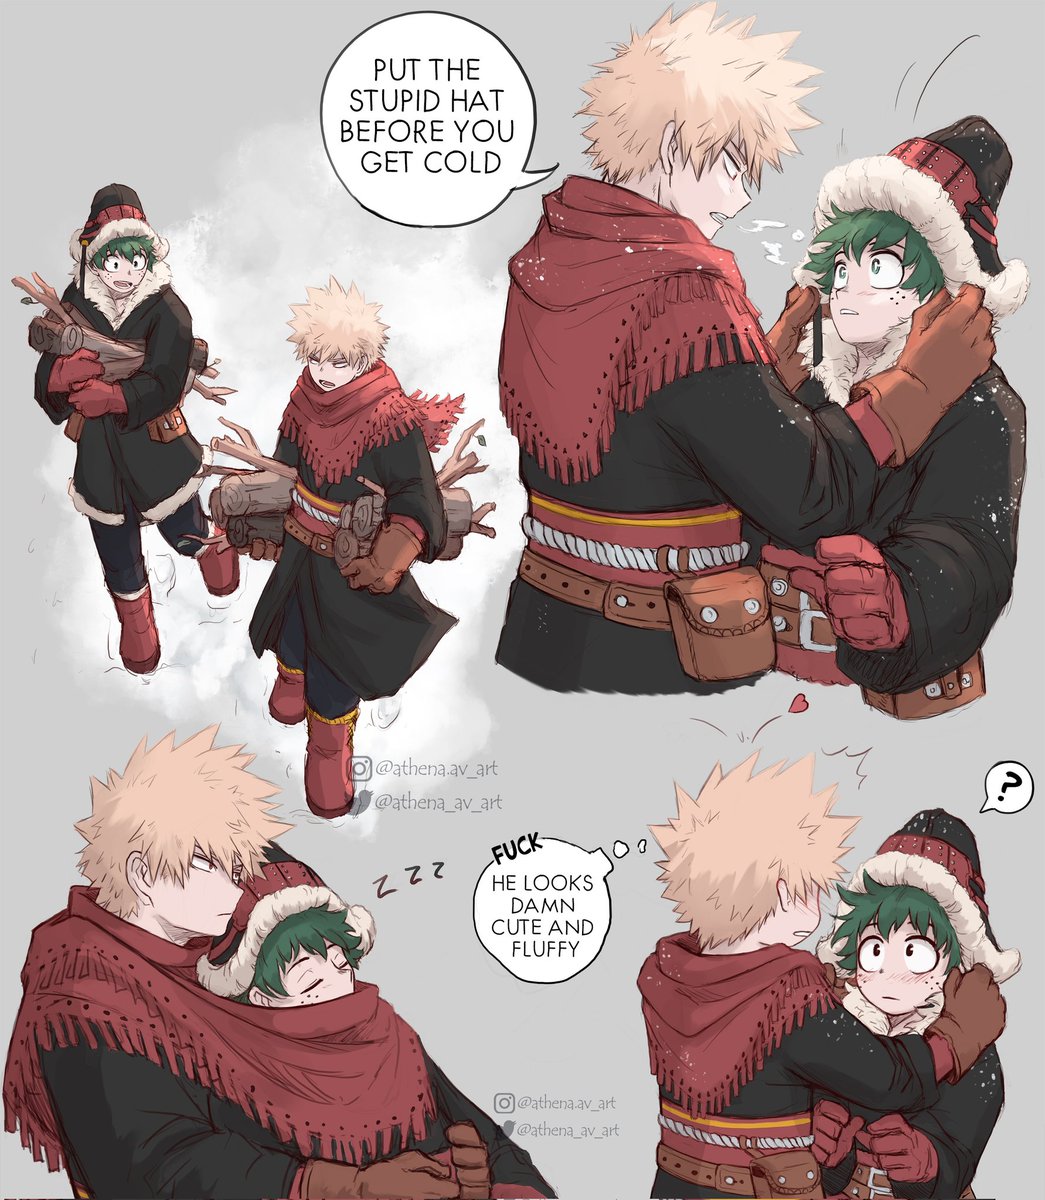 Little drawing for today ❄ They look so cute and fluffy with this outfit 🙈💚🧡
.
#sketch #bnha336 #BNHA #MHA336 #MHA #bakudeku #BKDK #bkdkwinter #BokuNoHeroAcademia #MyHeroAcademia #myheroacademia336 #bokunohero 